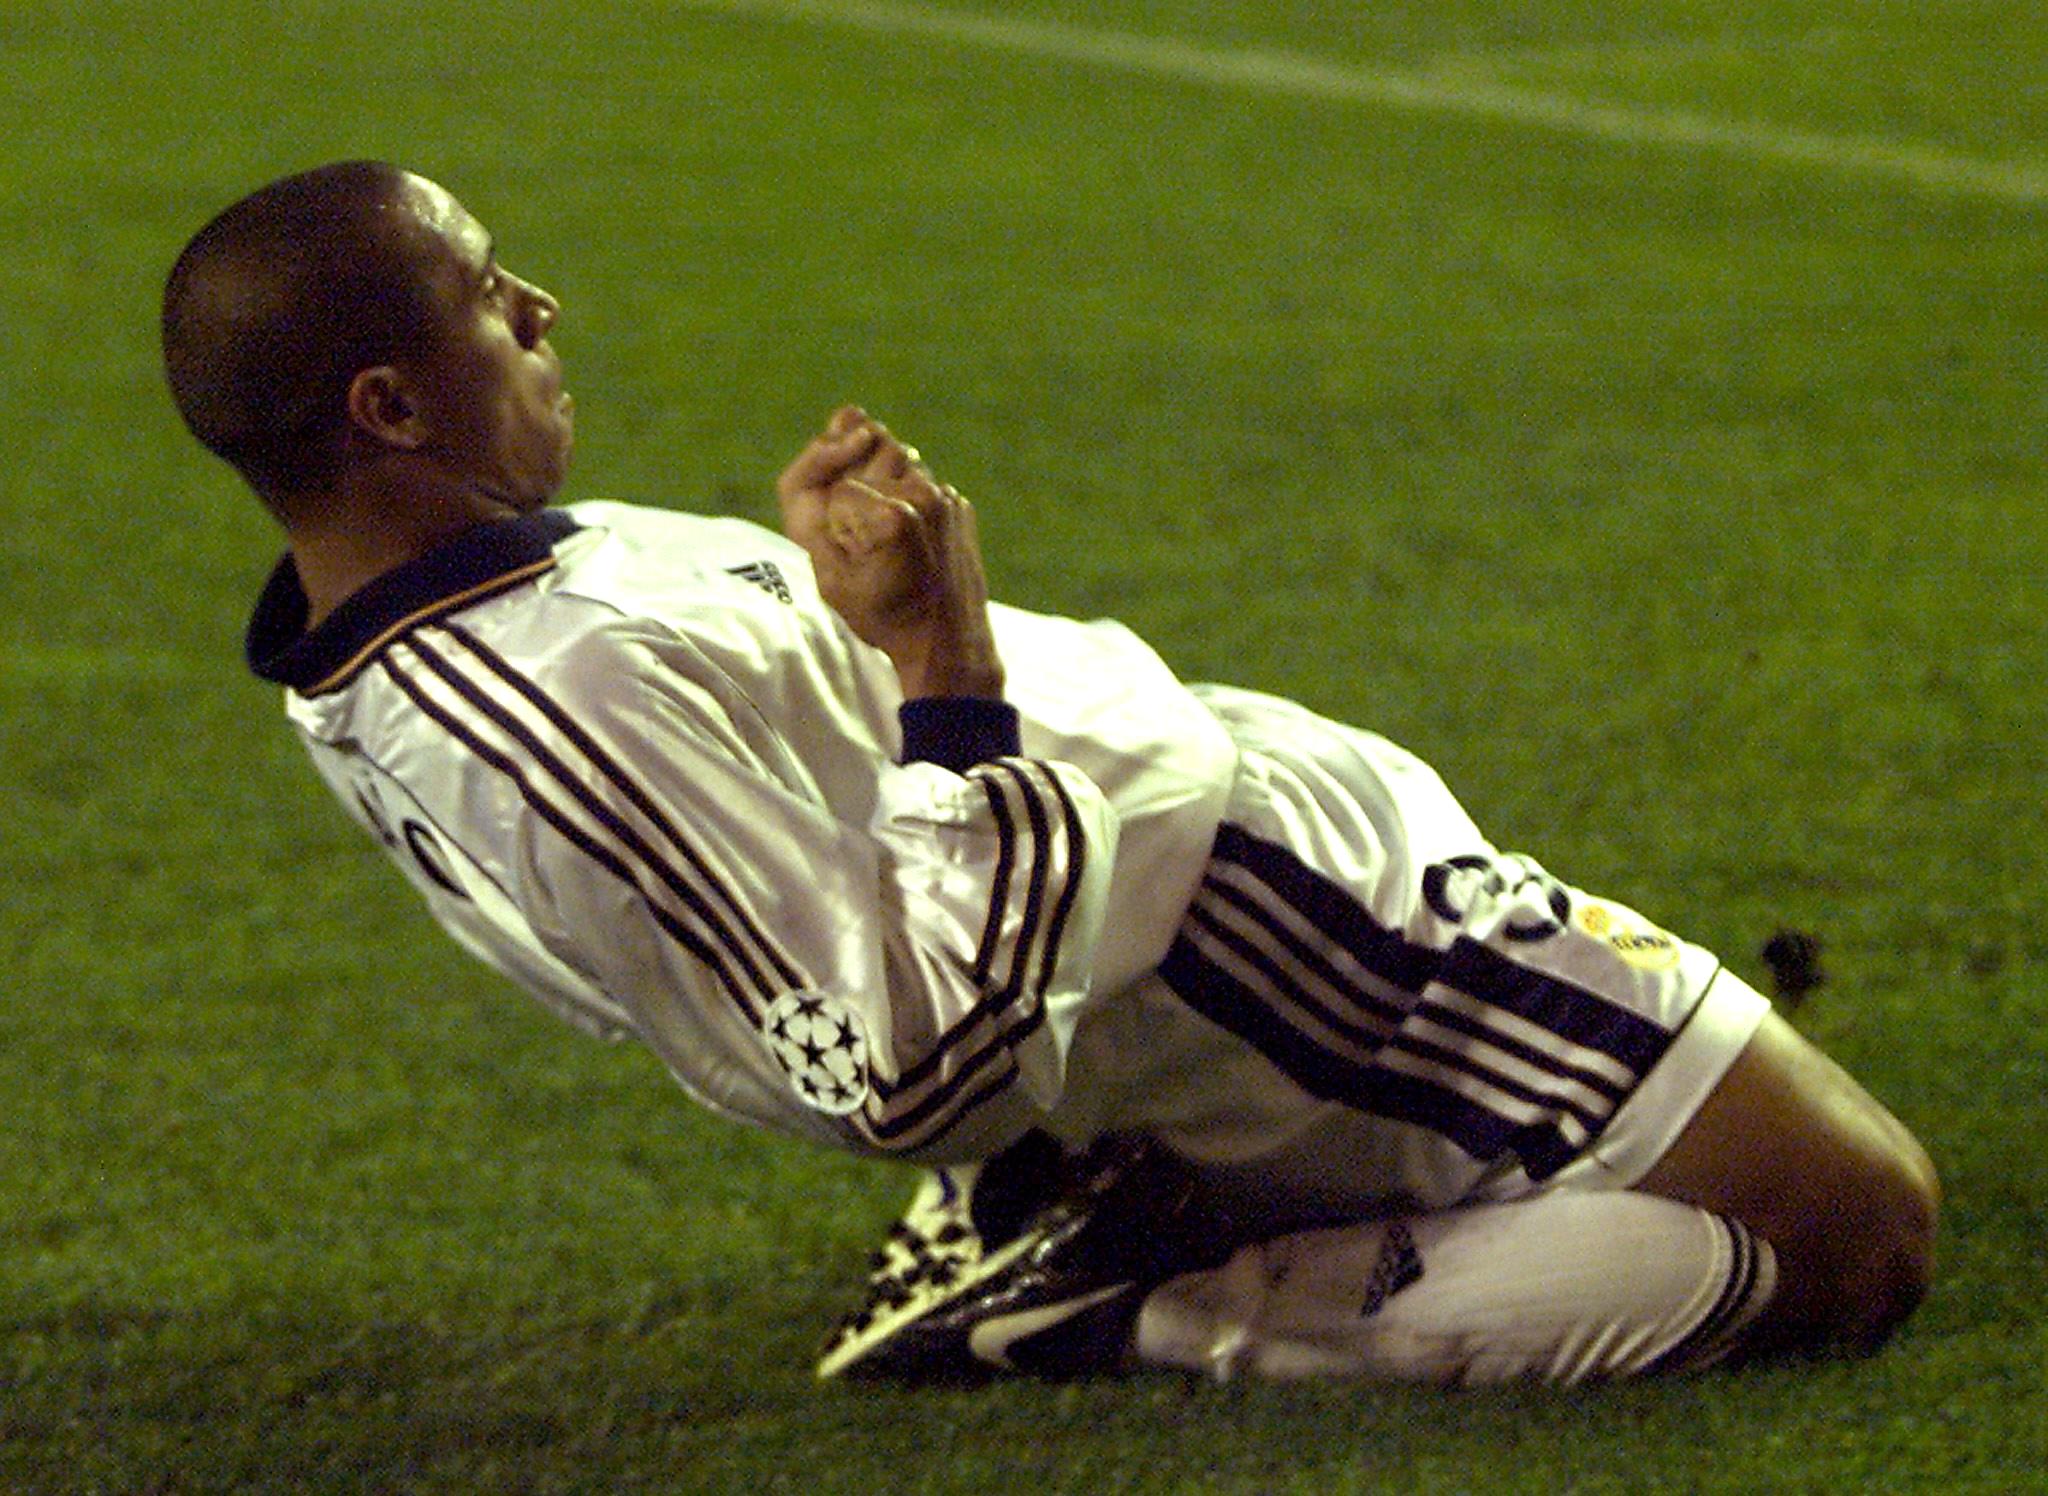 Roberto Carlos celebrates a goal for Real Madrid against Olympiacos in 1999.